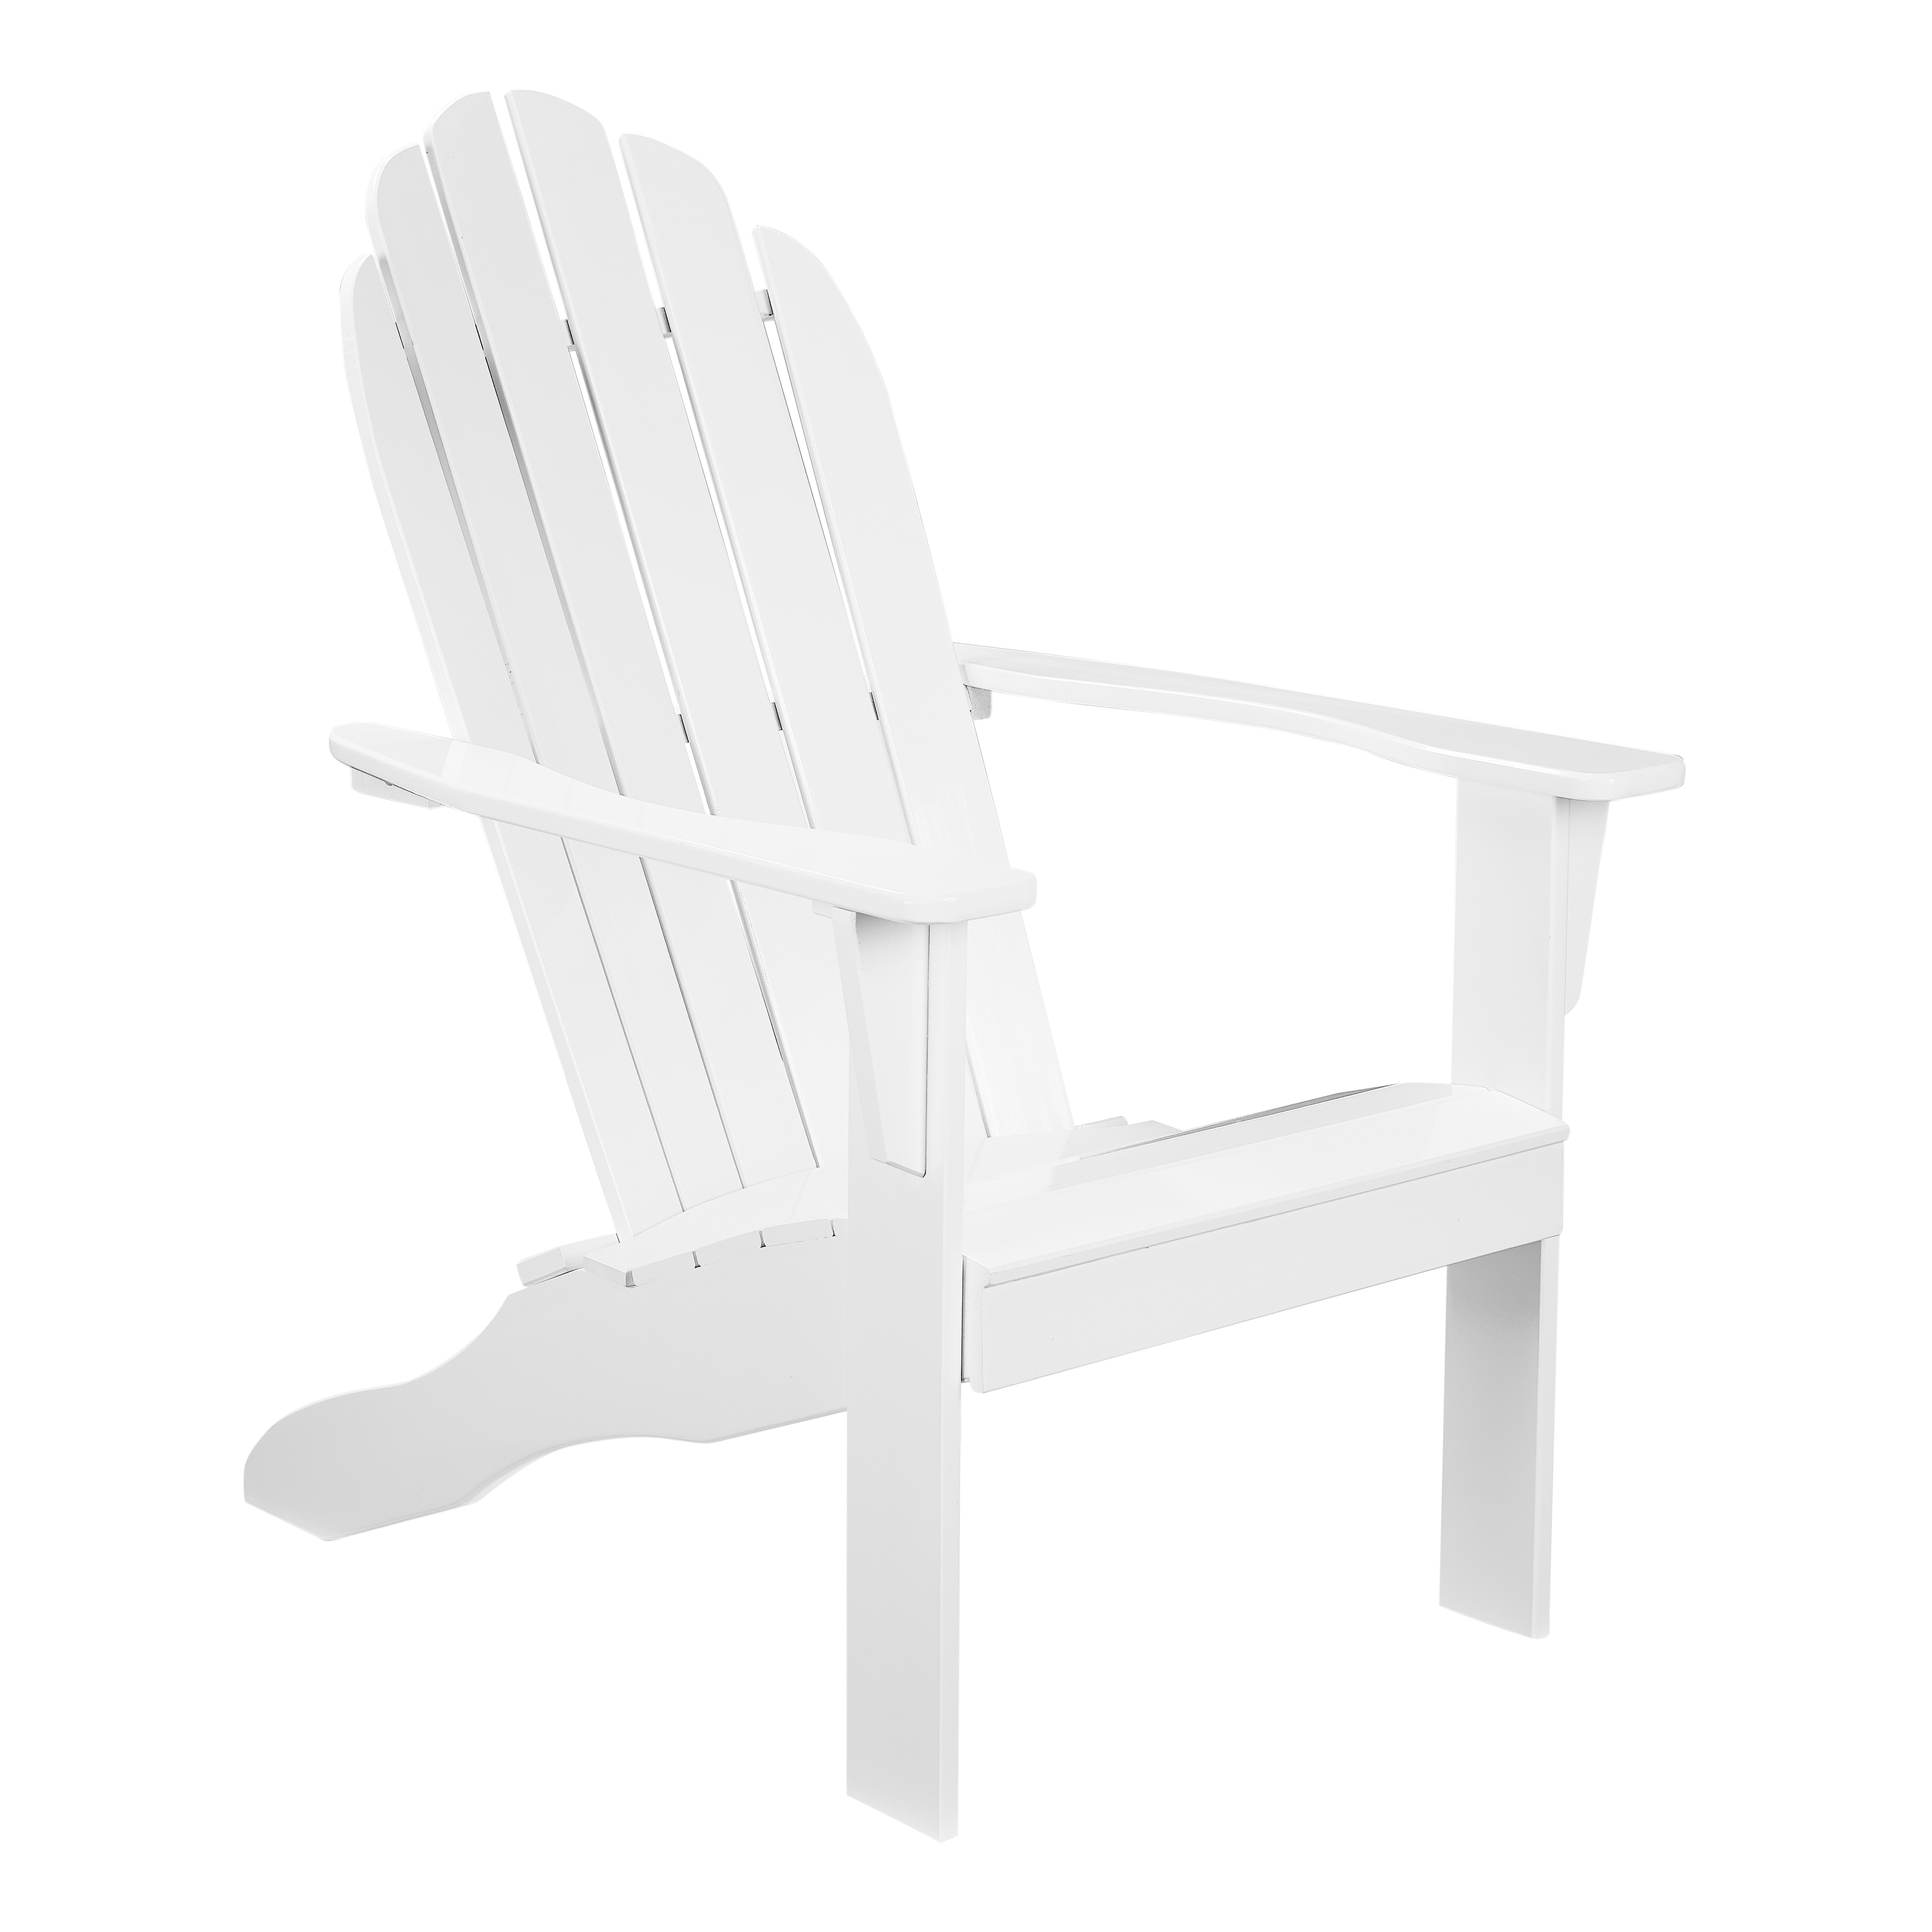 Mainstays Weather Resistant Rubberwood Adirondack Chair - White - image 1 of 9